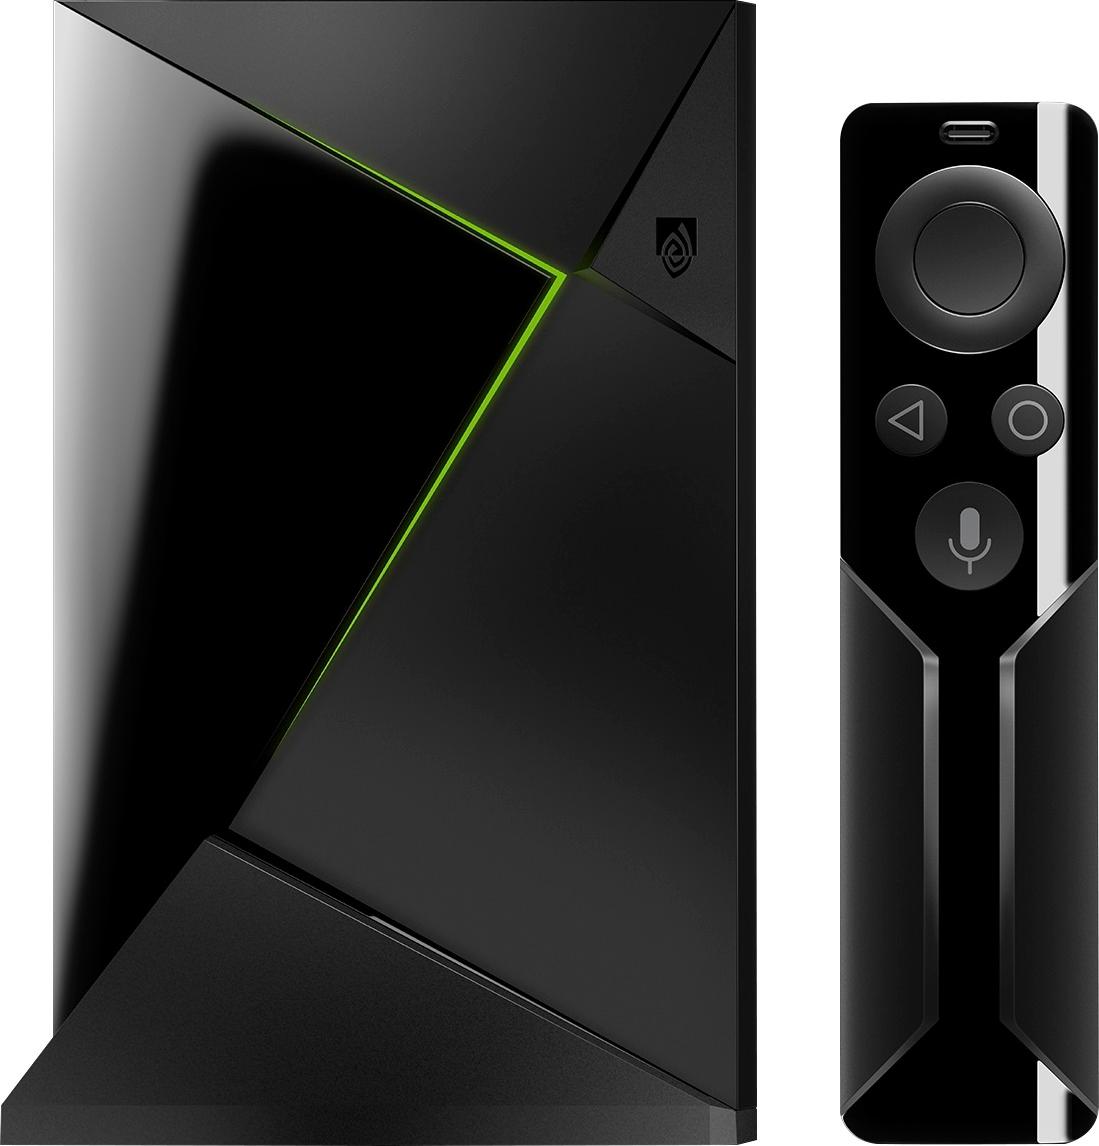 NVIDIA SHIELD Android TV Pro 16GB 4K HDR Streaming Media Player with Google  Assistant and GeForce NOW Black 945128972500101 - Best Buy